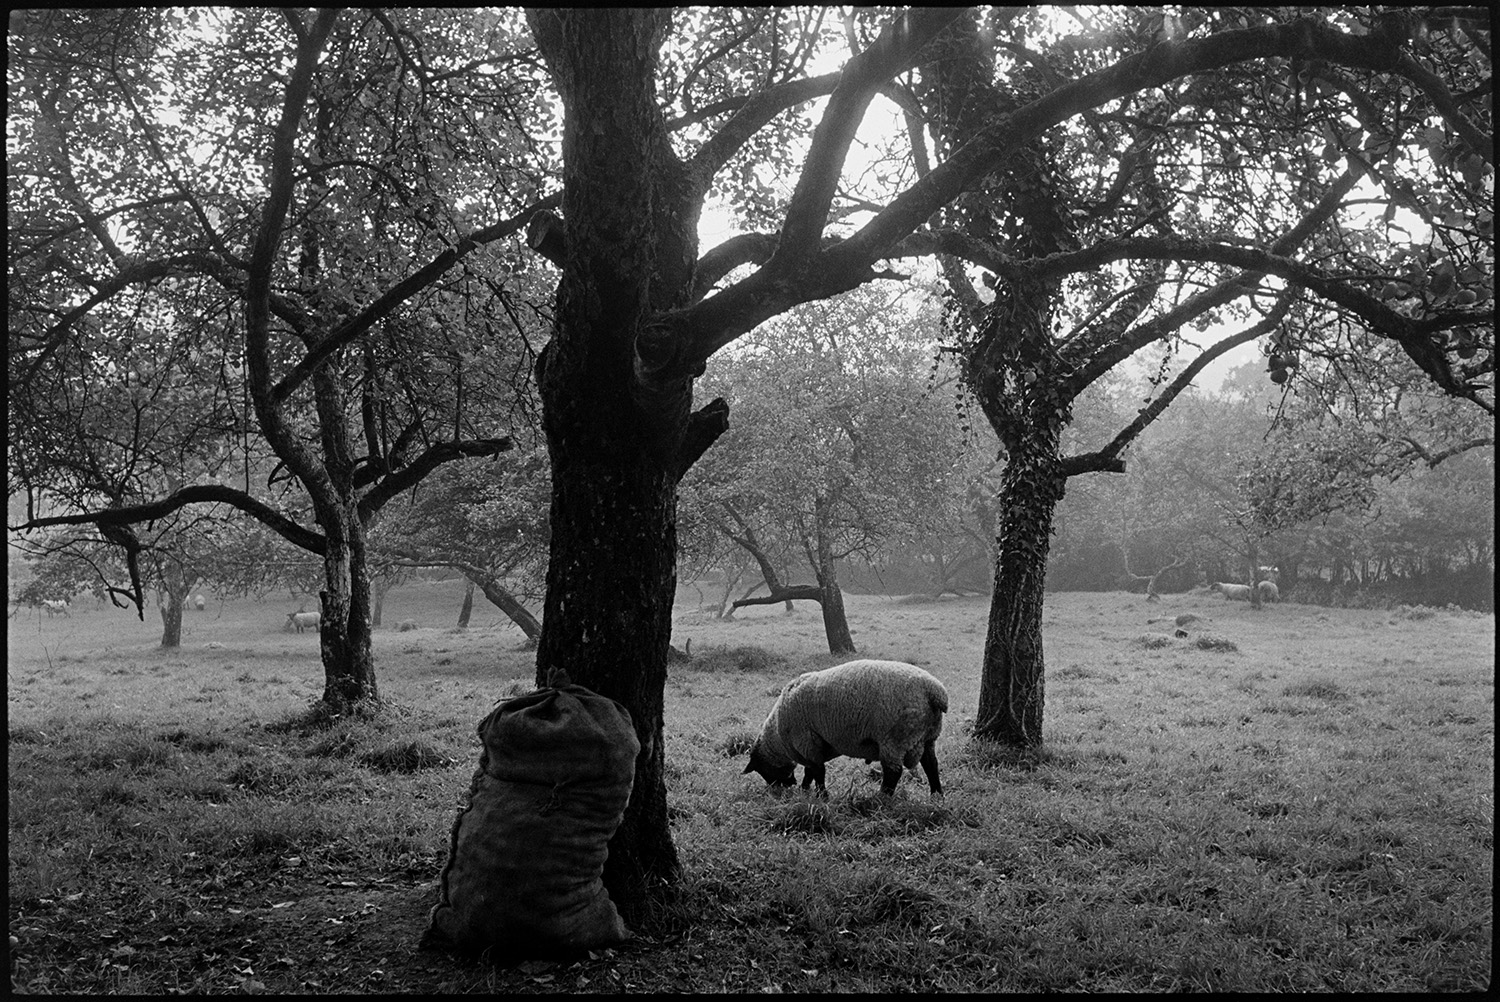 Rams sitting in cider orchard, sack of apples against tree. 
[Rams grazing in a cider orchard at Westpark, Iddesleigh.  A bag of apples is resting against a tree in the foreground.]